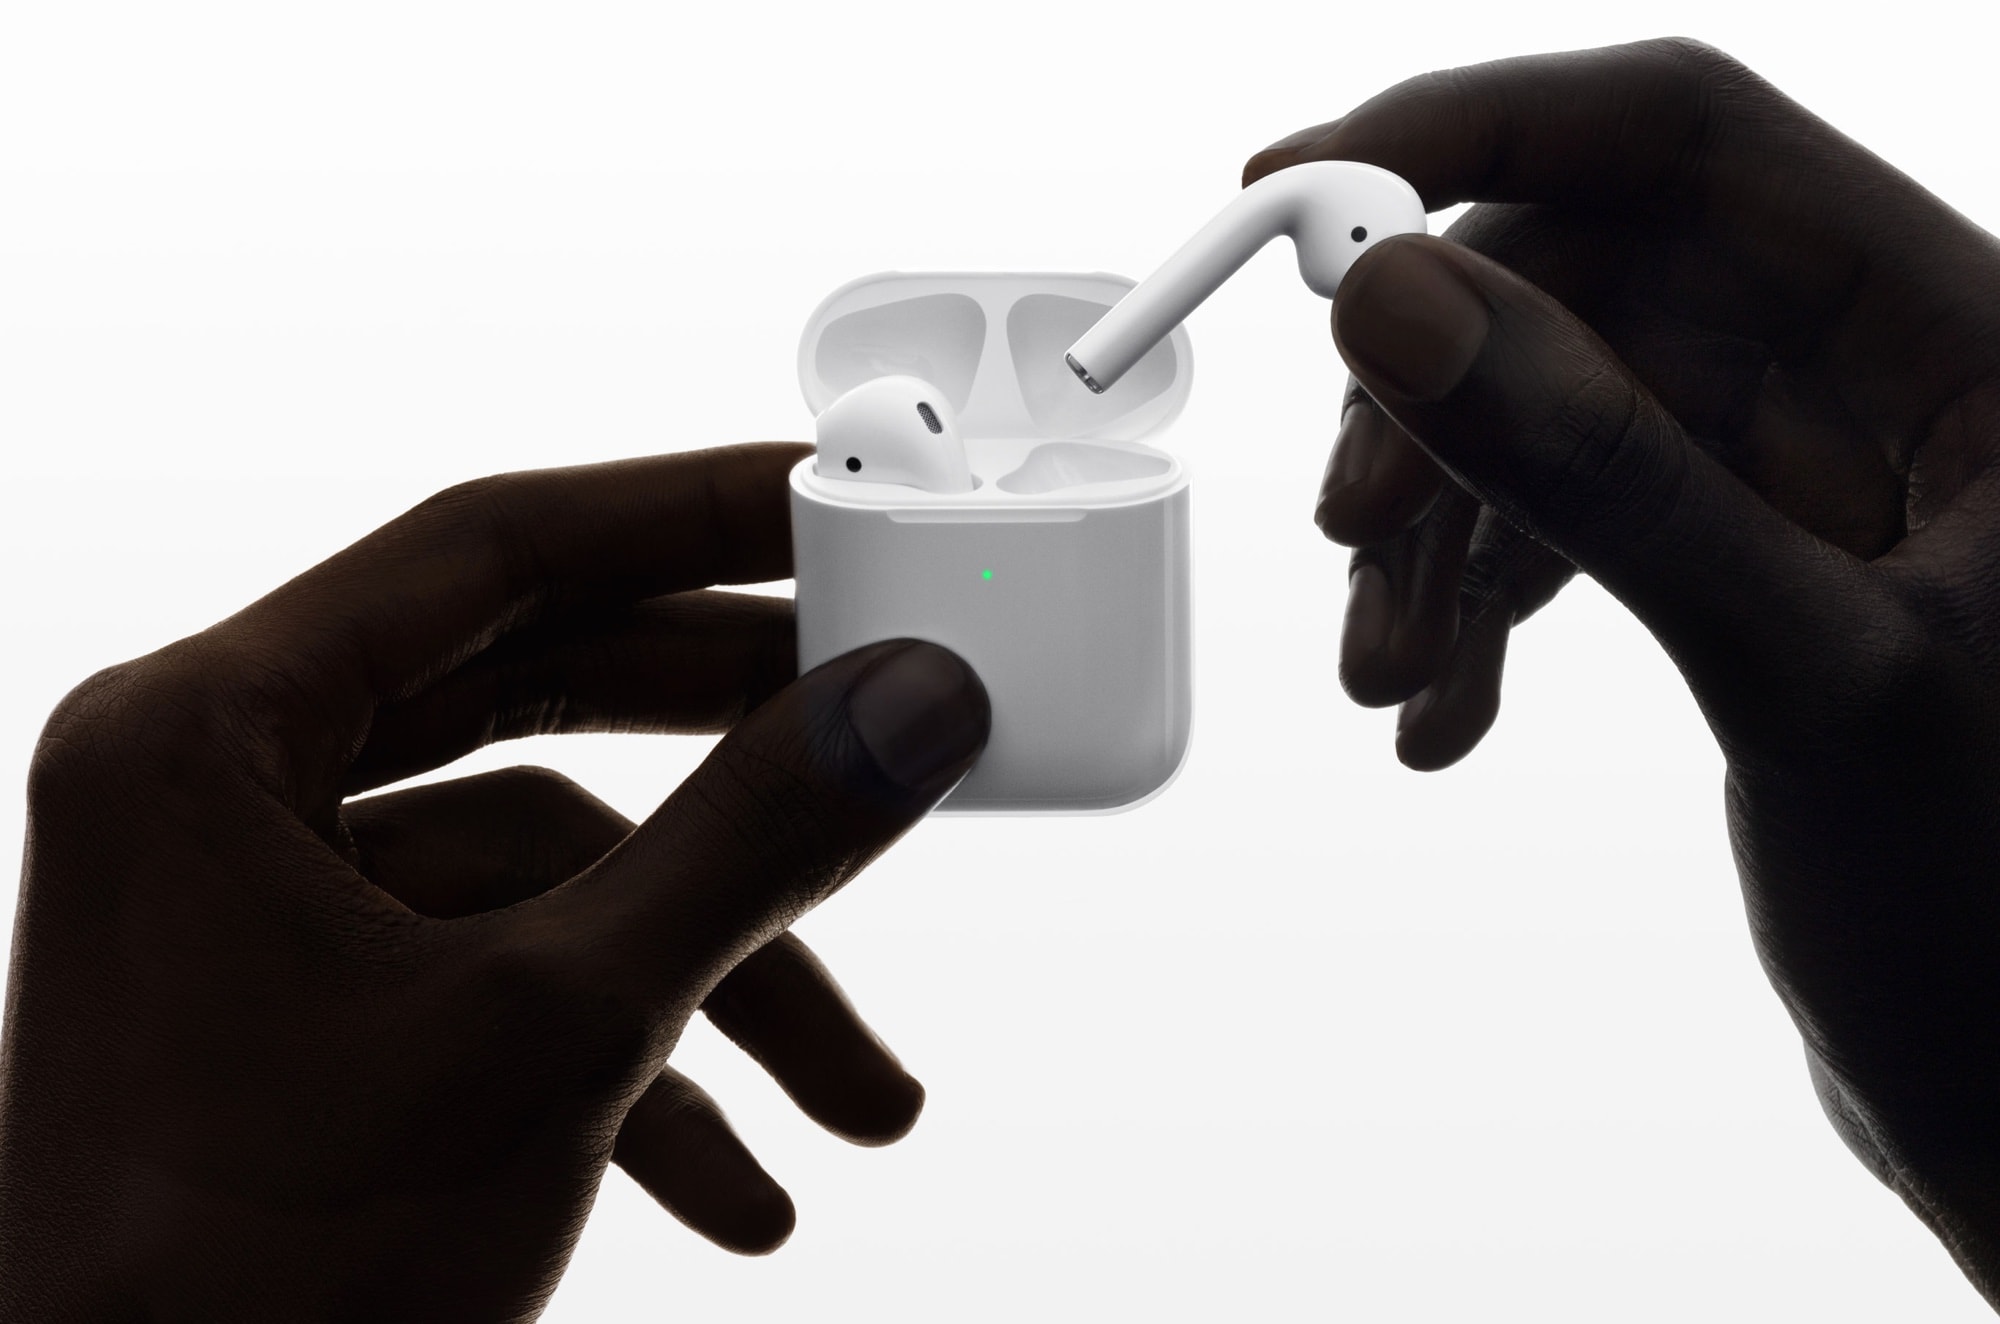 AirPods 2. AirPods S, more like.